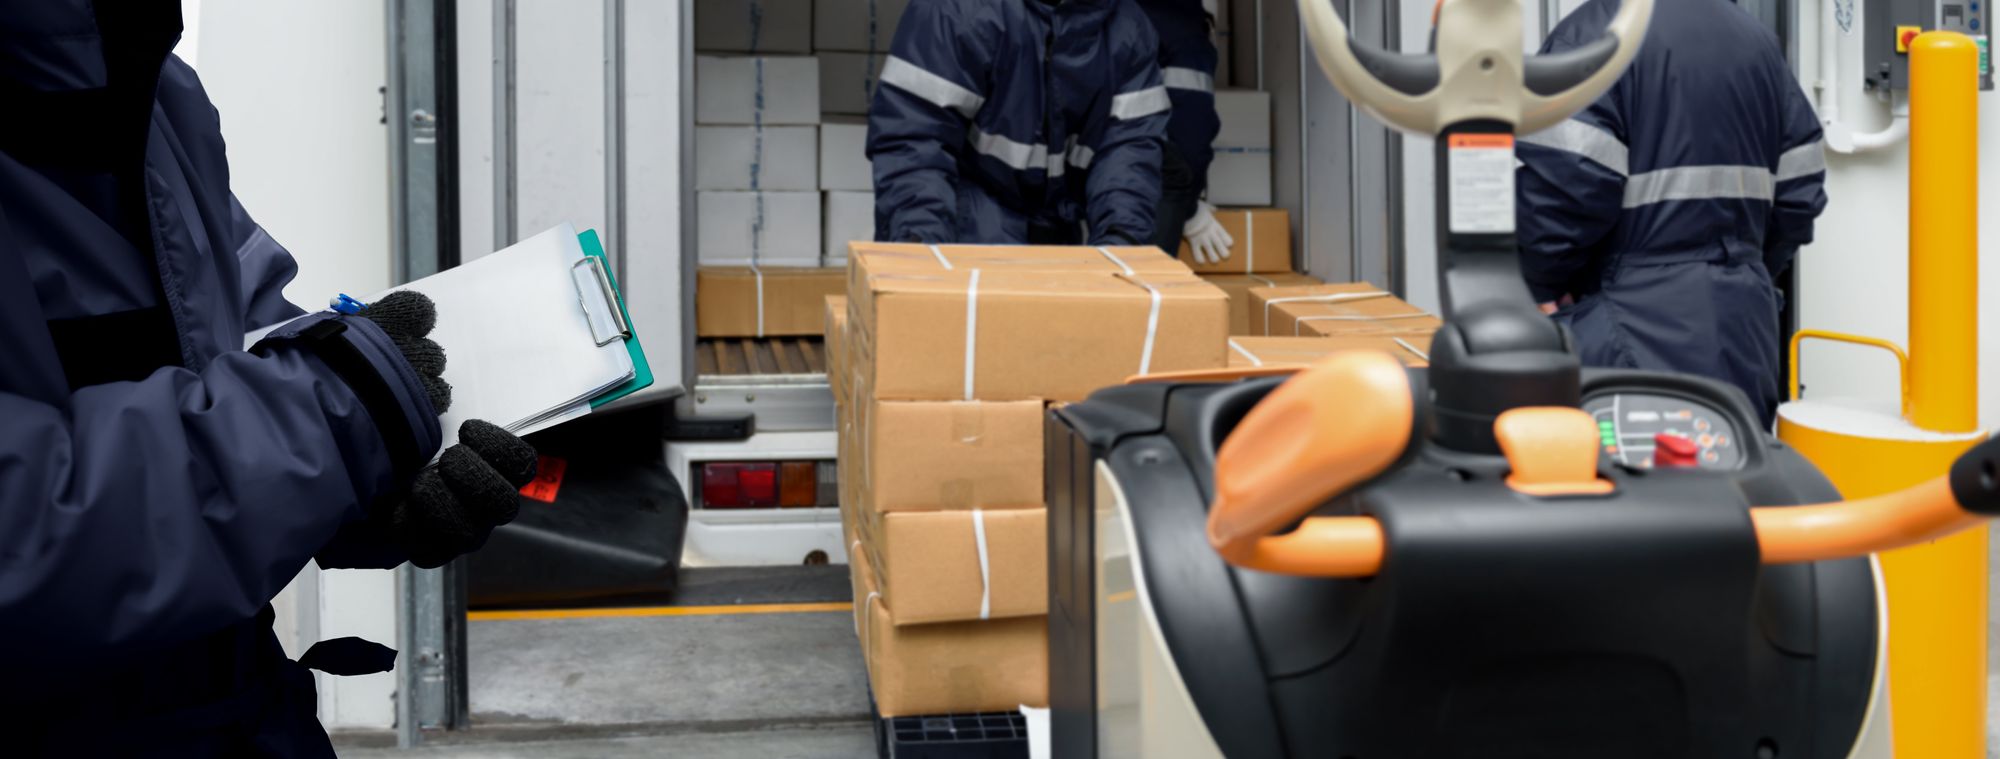 Cold chain delivery management